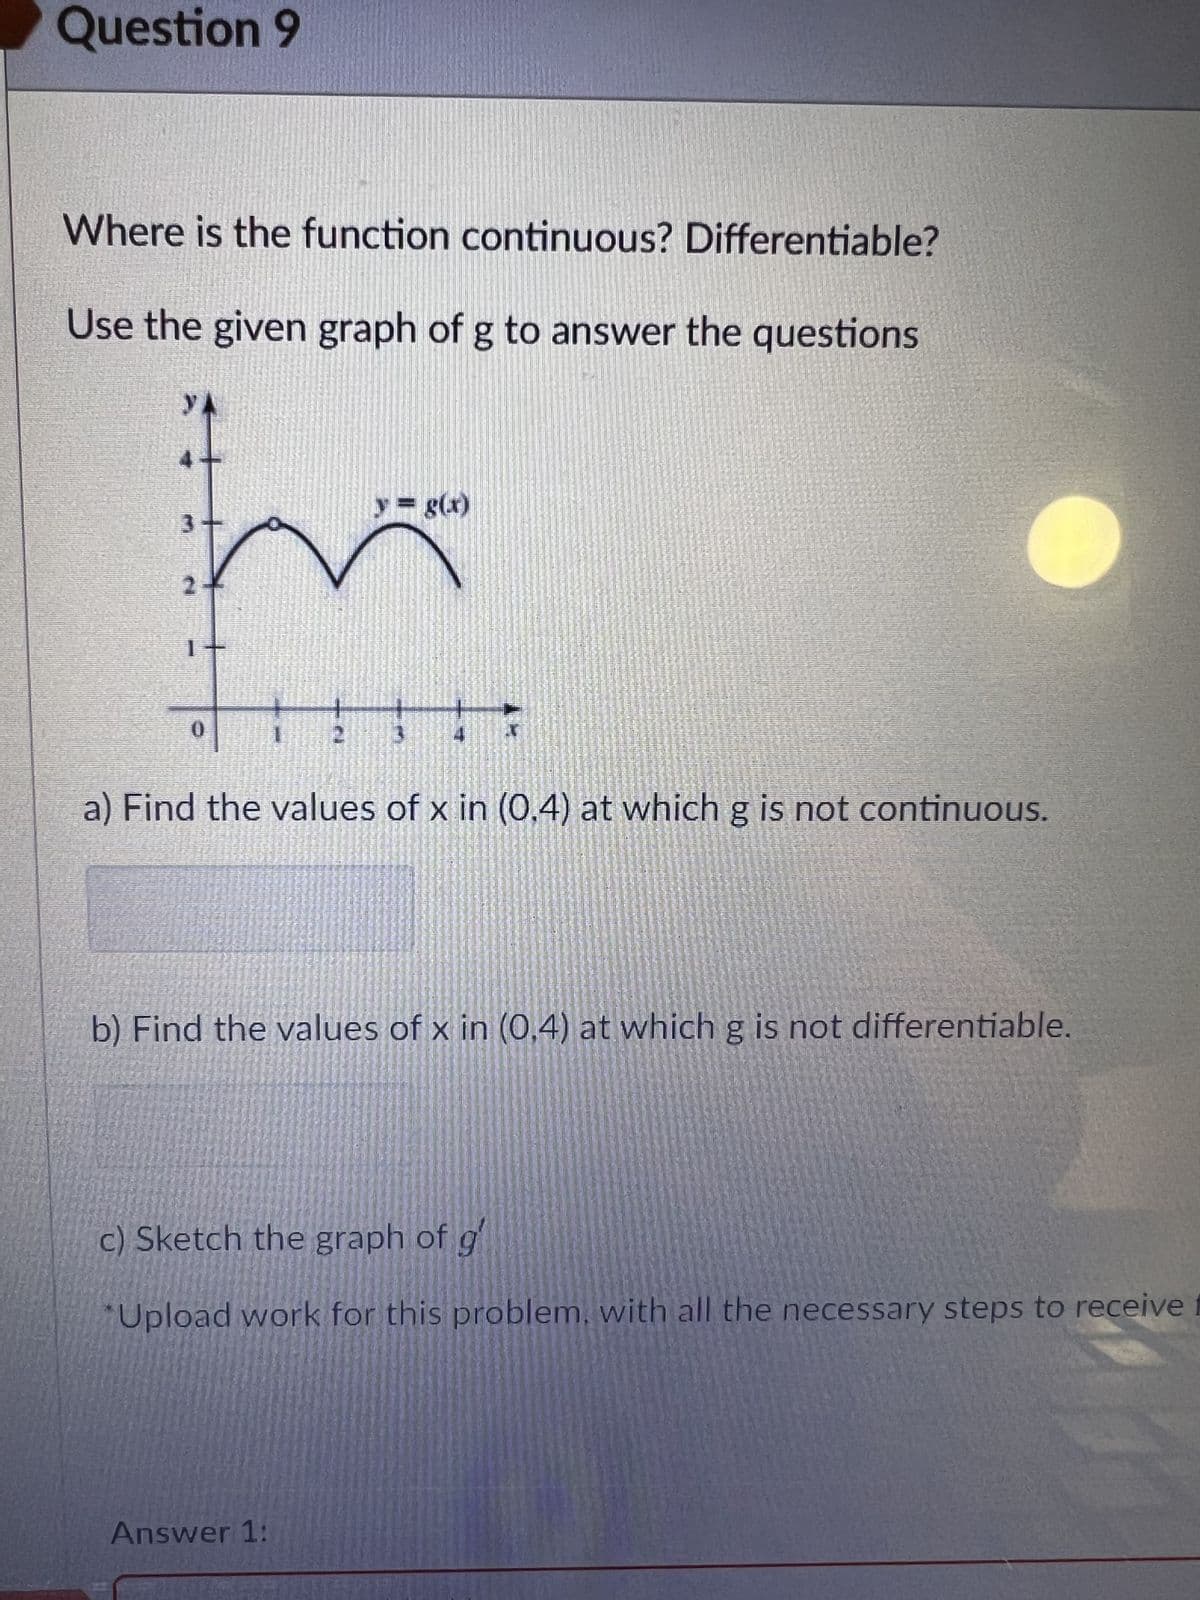 Question 9
Where is the function continuous? Differentiable?
Use the given graph of g to answer the questions
21
1
V
0
y = g(x)
a) Find the values of x in (0.4) at which g is not continuous.
b) Find the values of x in (0,4) at which g is not differentiable.
c) Sketch the graph of g
Upload work for this problem, with all the necessary steps to receive f
Answer 1: